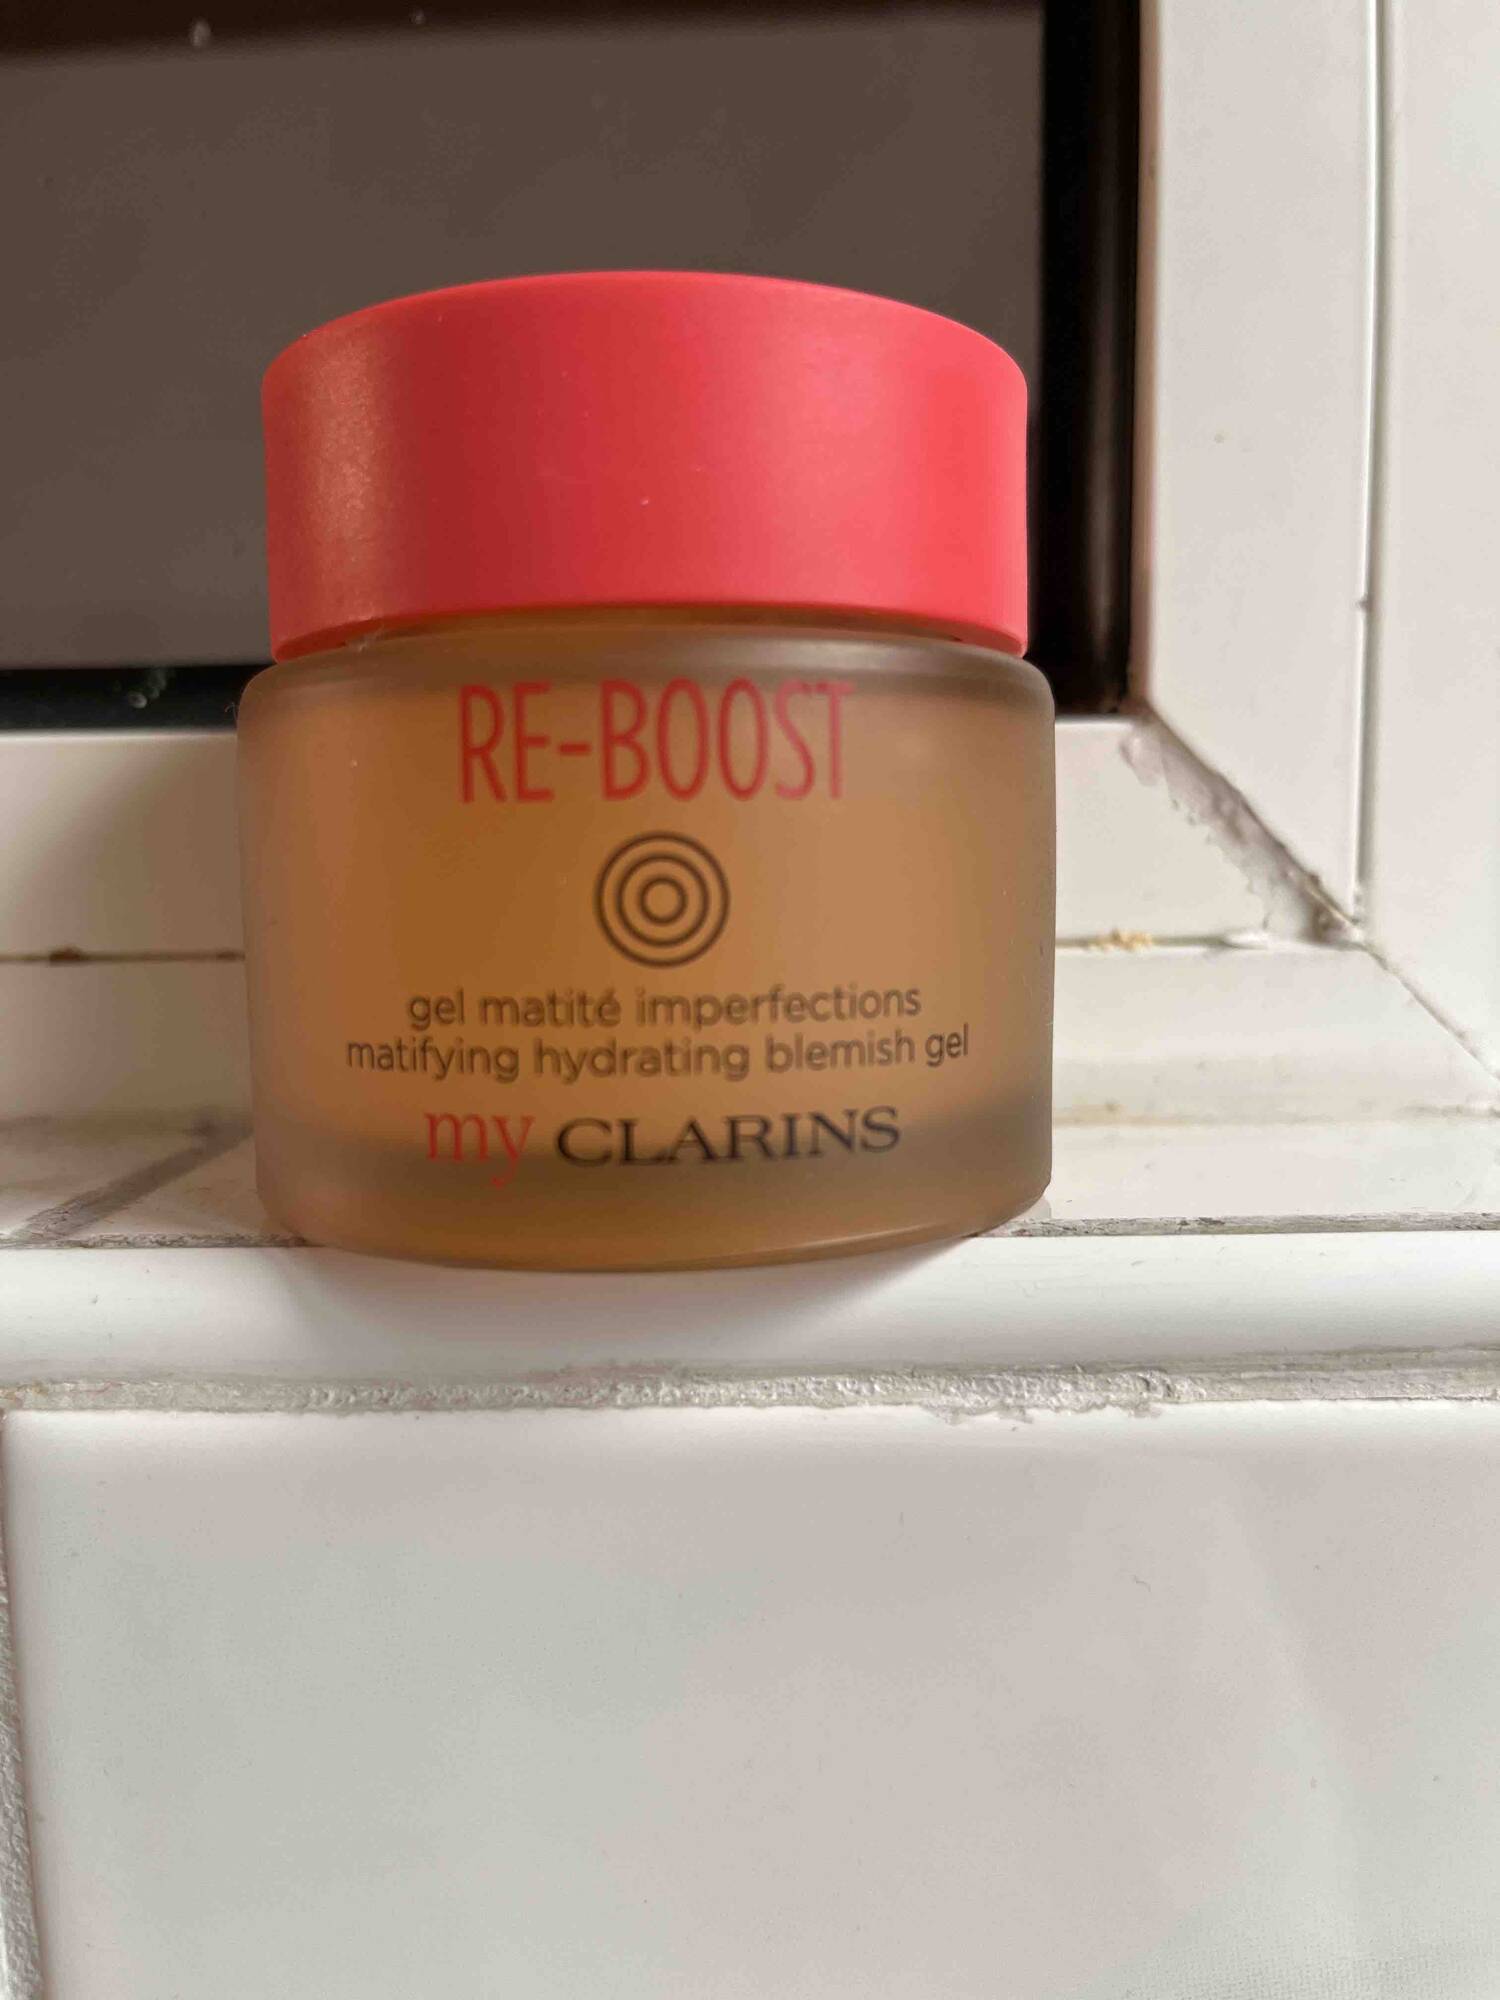 MY CLARINS - Re-Boost - Gel matité imperfections